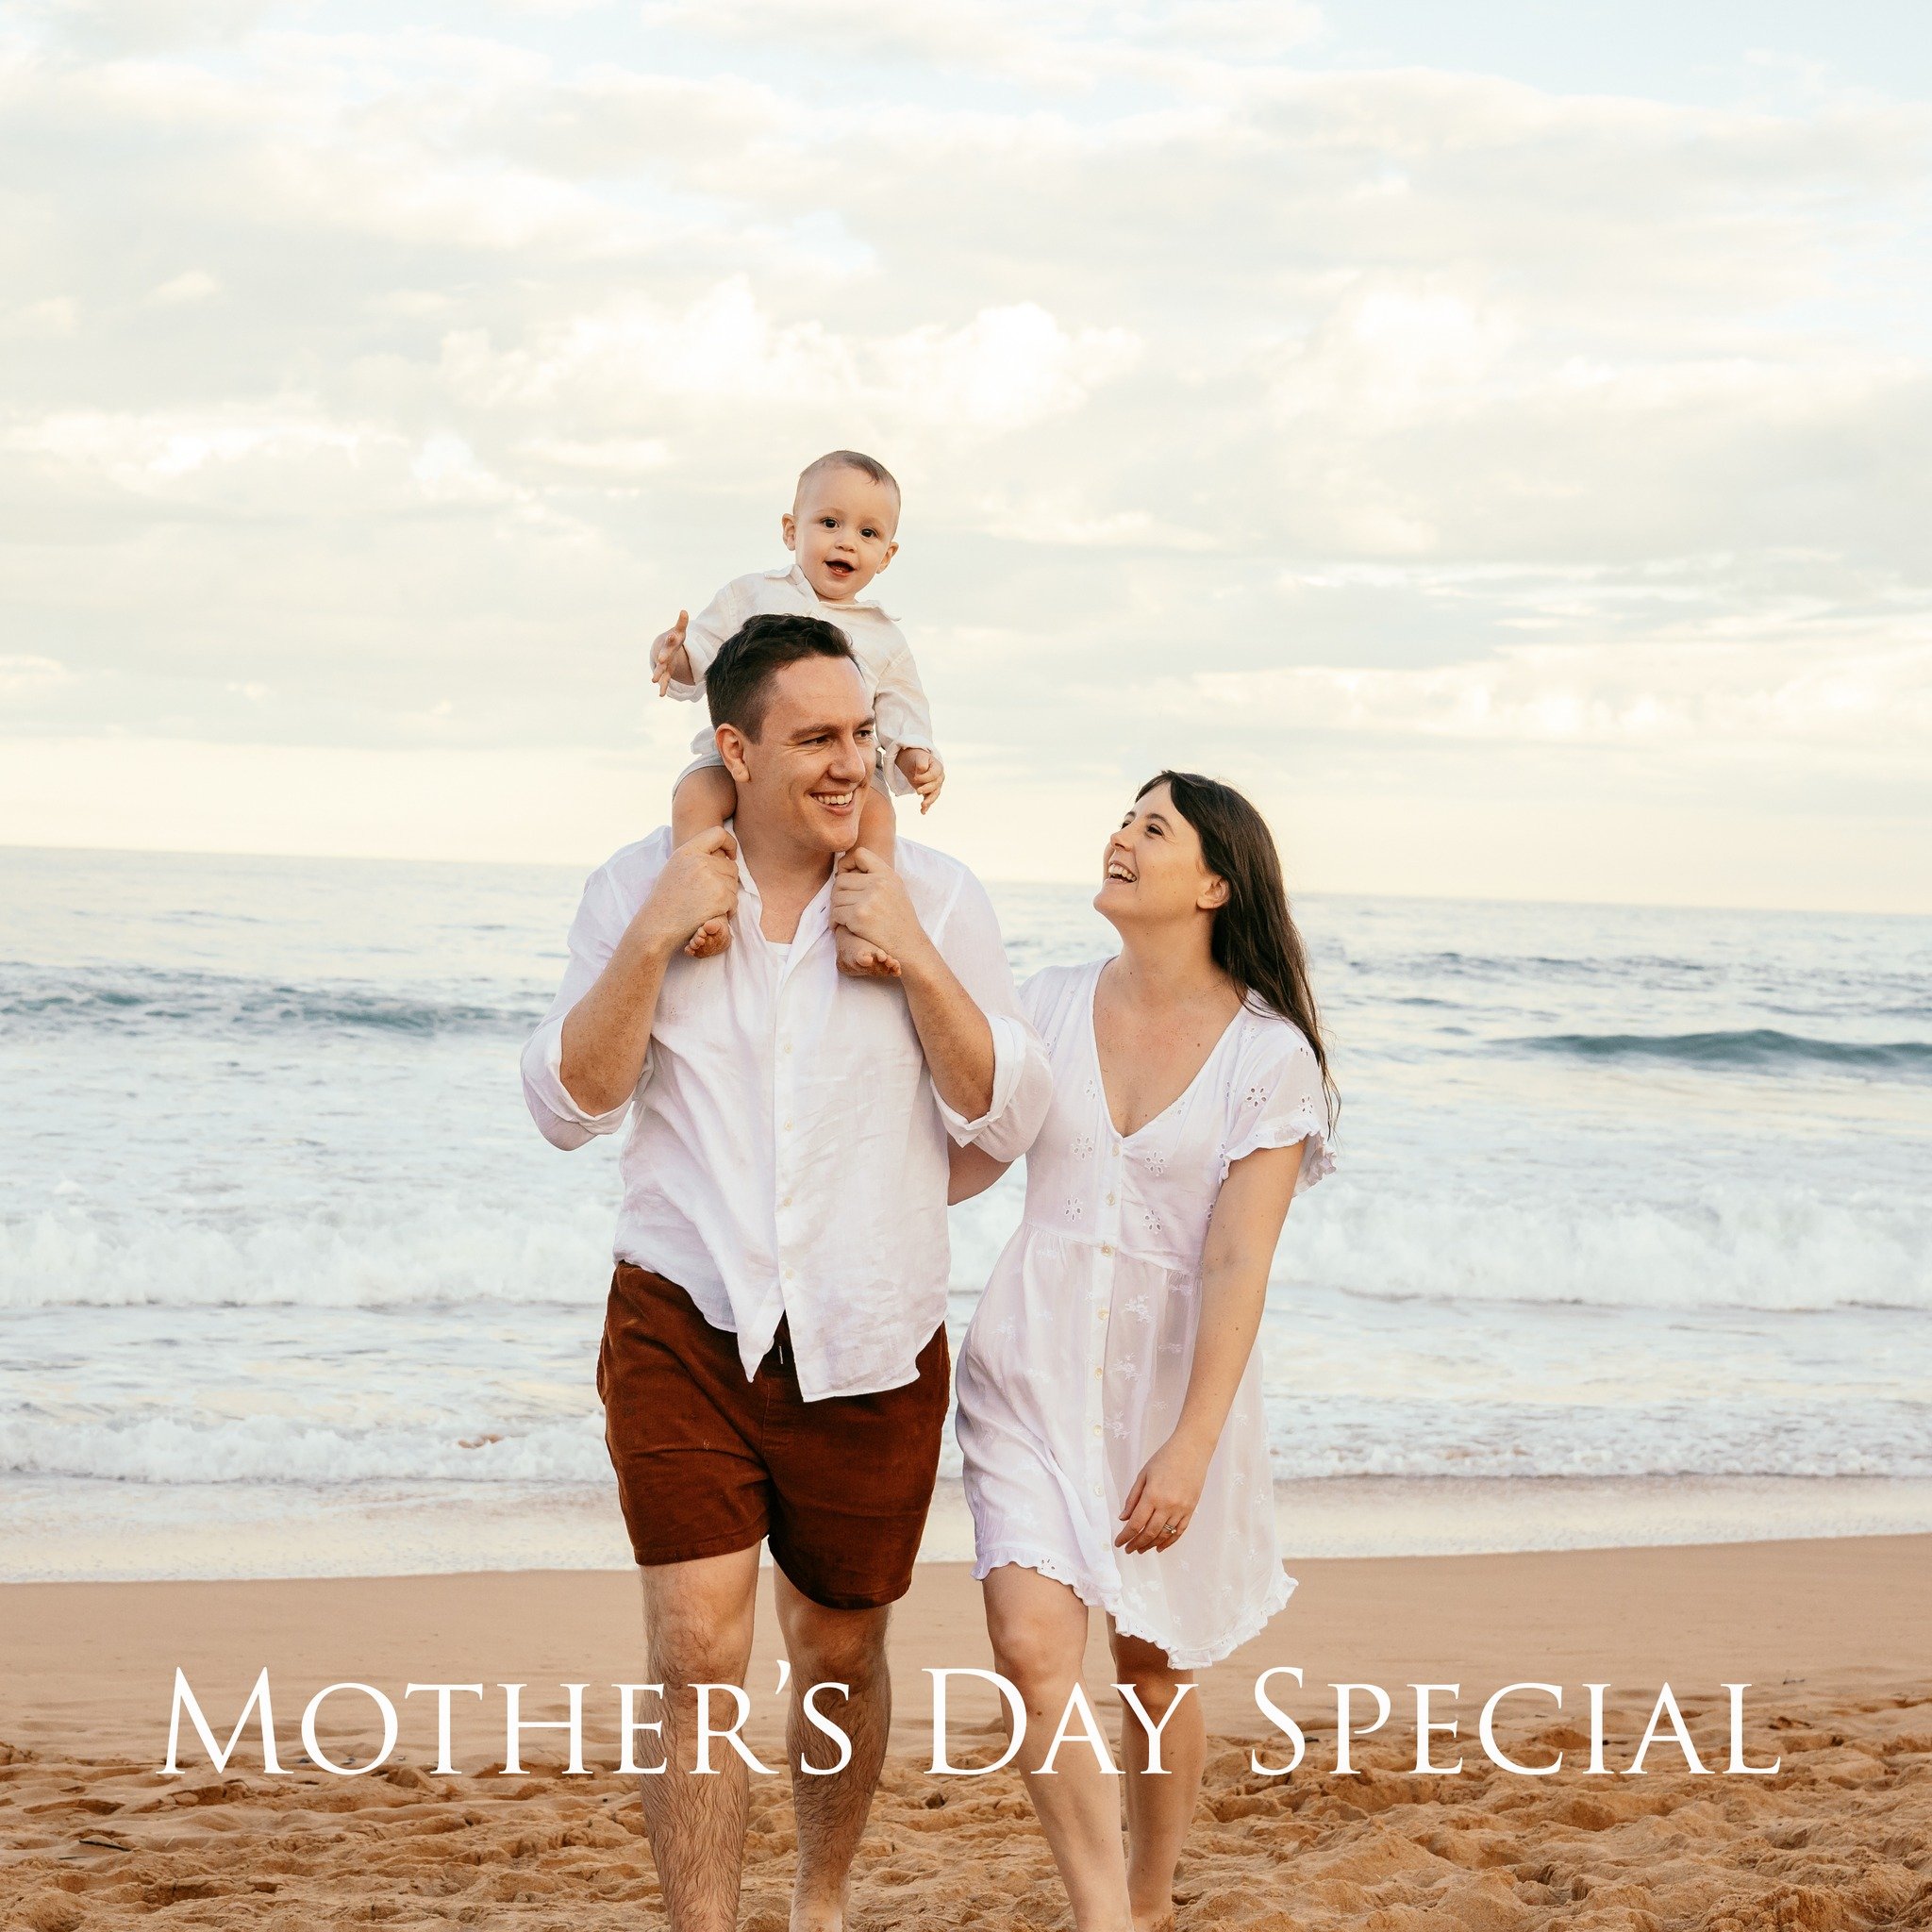 Celebrate your Mum this Mother's Day with a beautiful gift of a portrait photography session. Mother's Day Gift Vouchers include a portrait photography session and one 20x30cm mounted print of your choice for only $99 (normally worth $350). Sessions 